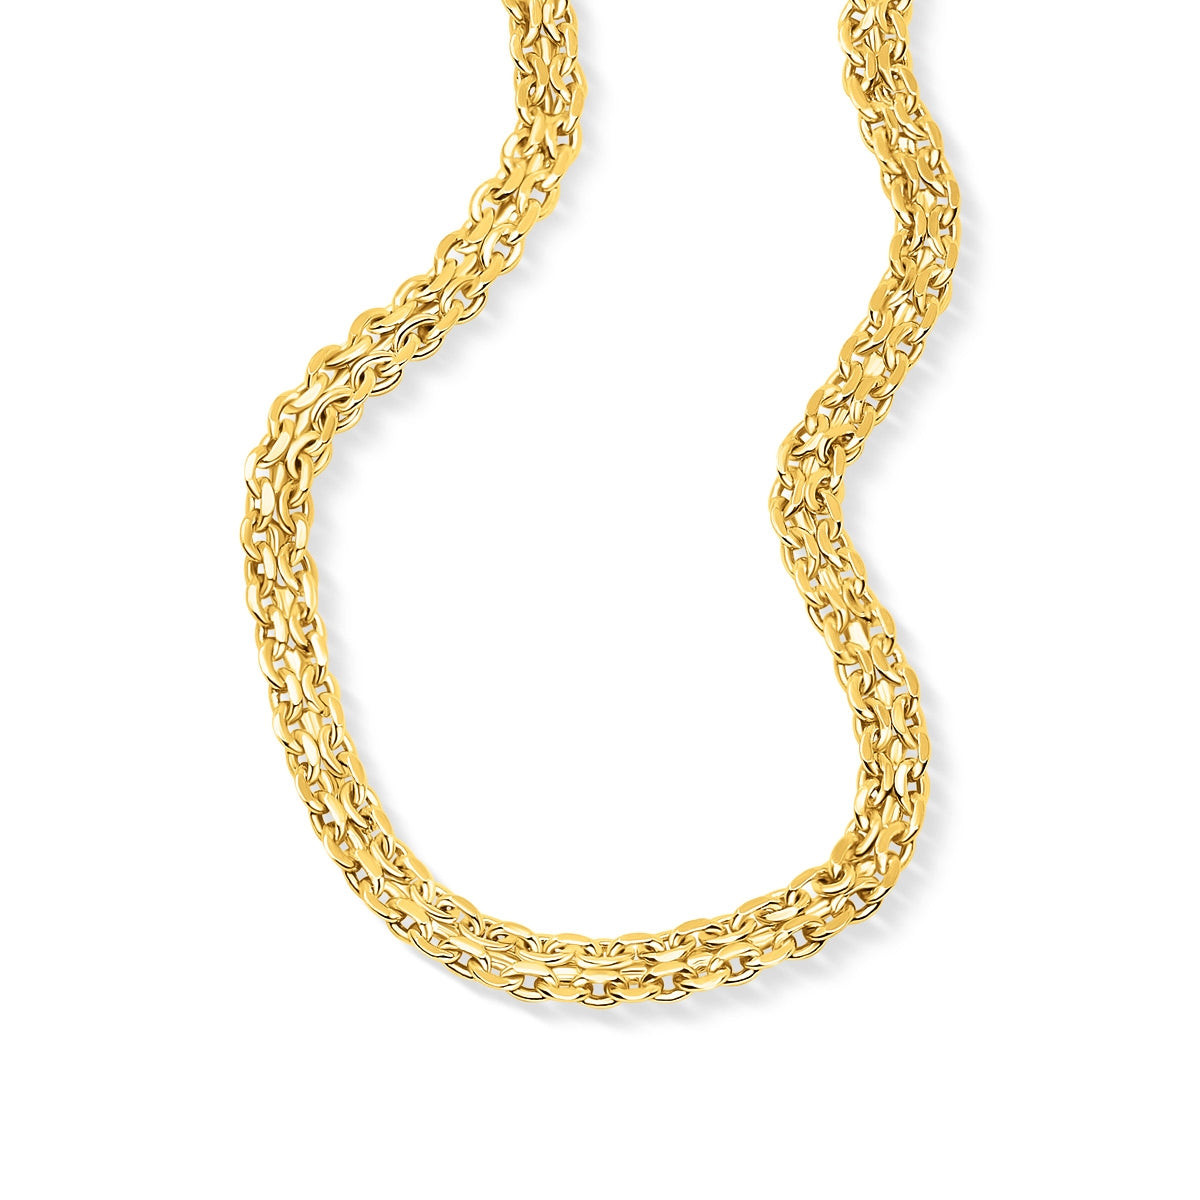 Shimmering gold link chain necklace